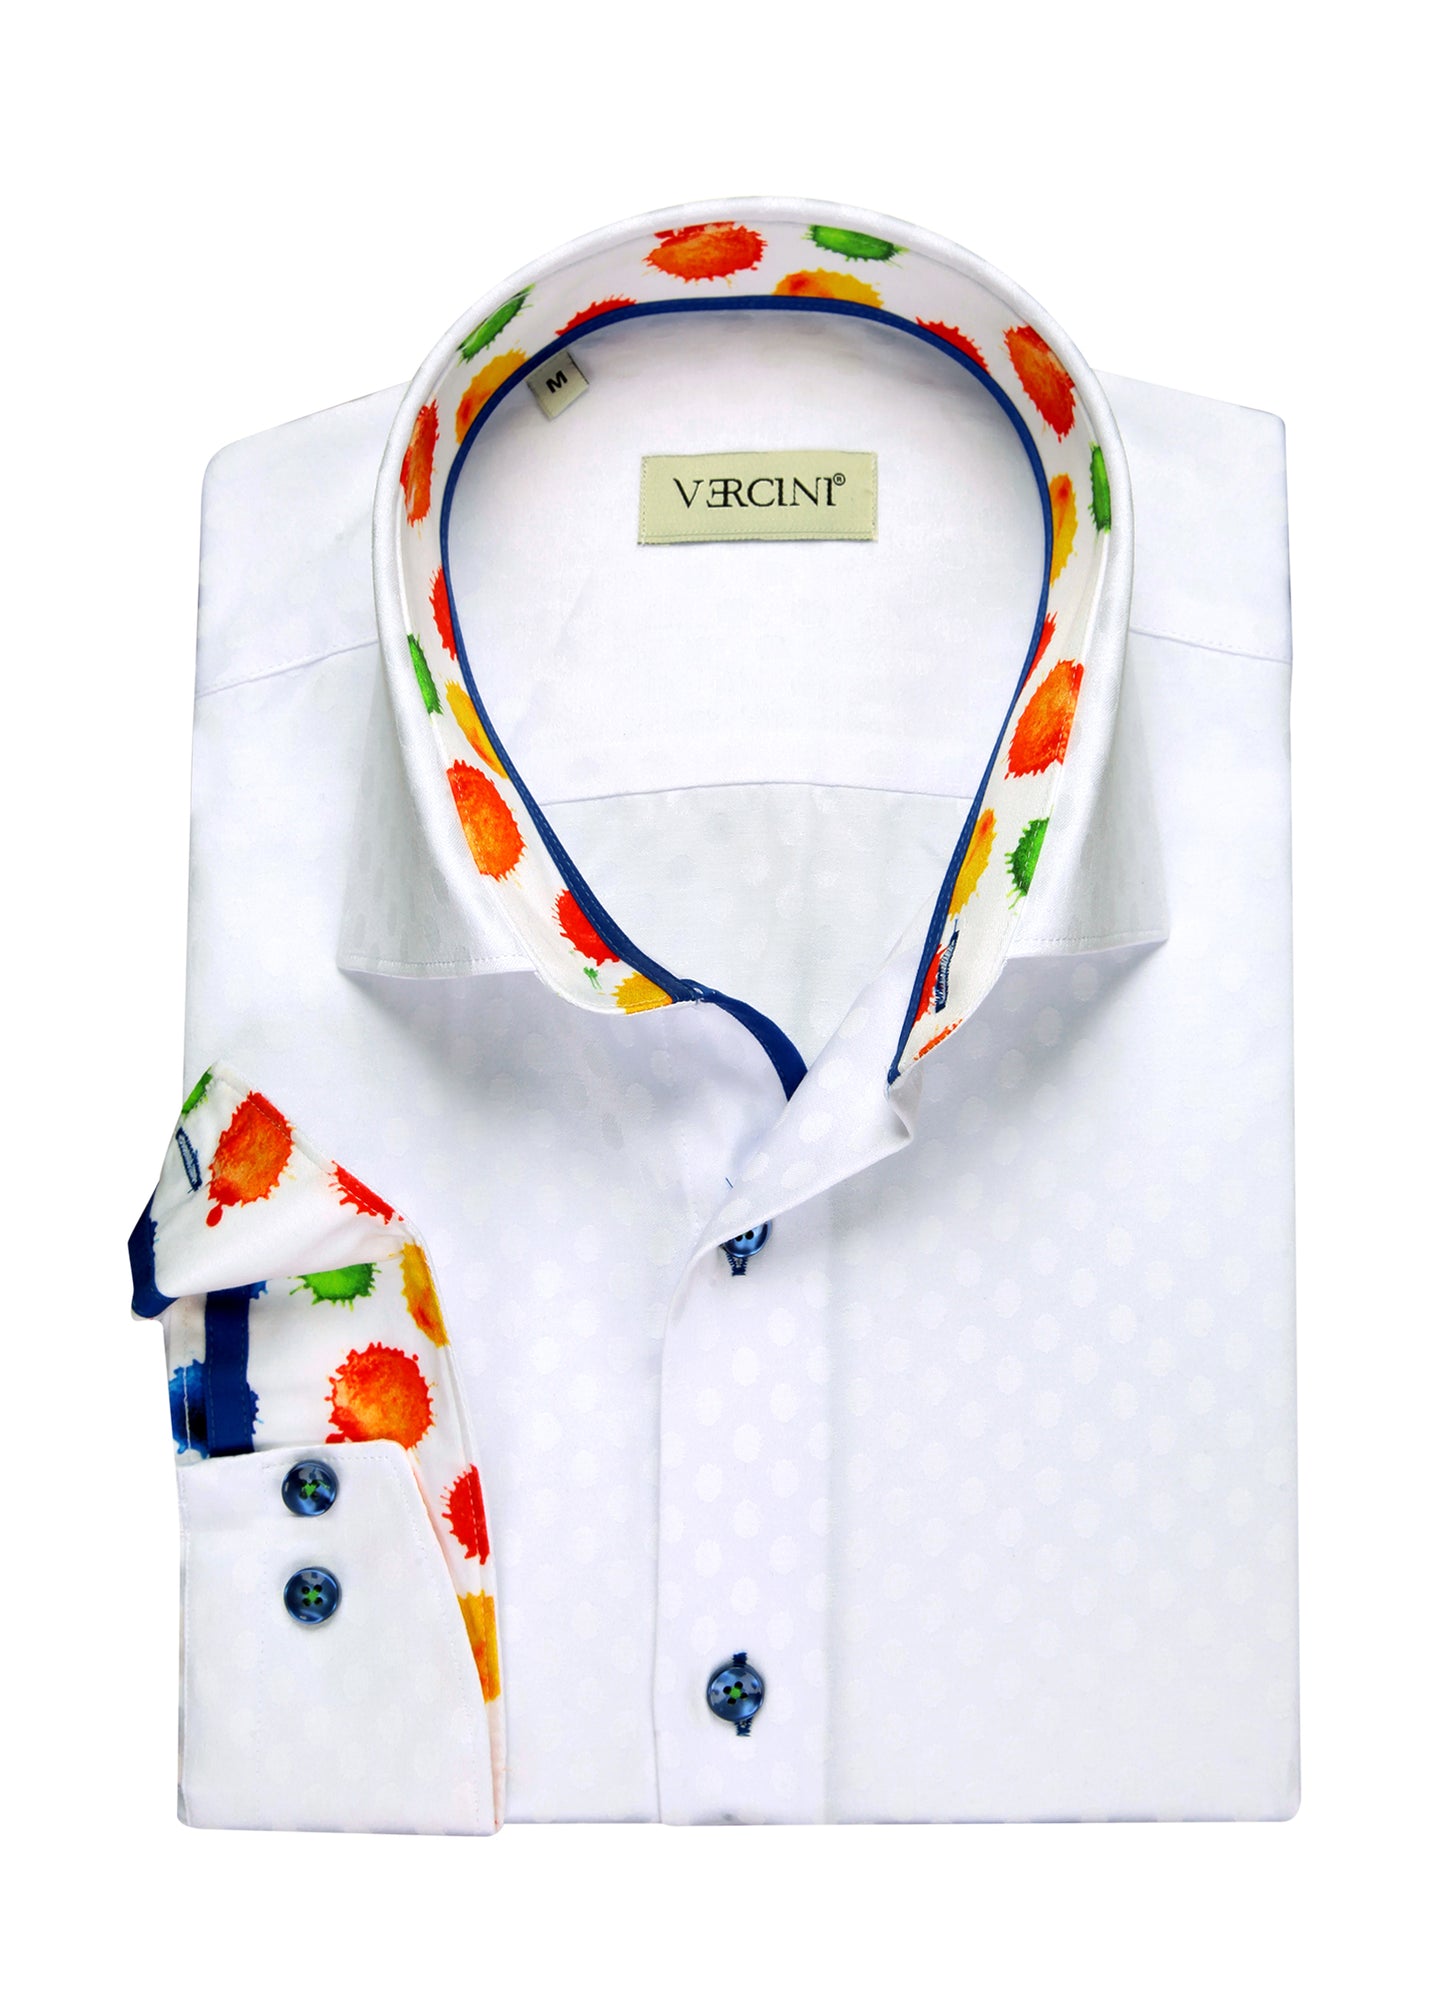 white shirt with white circles DRESS SHIRTS On Sale 30% Off Vercini